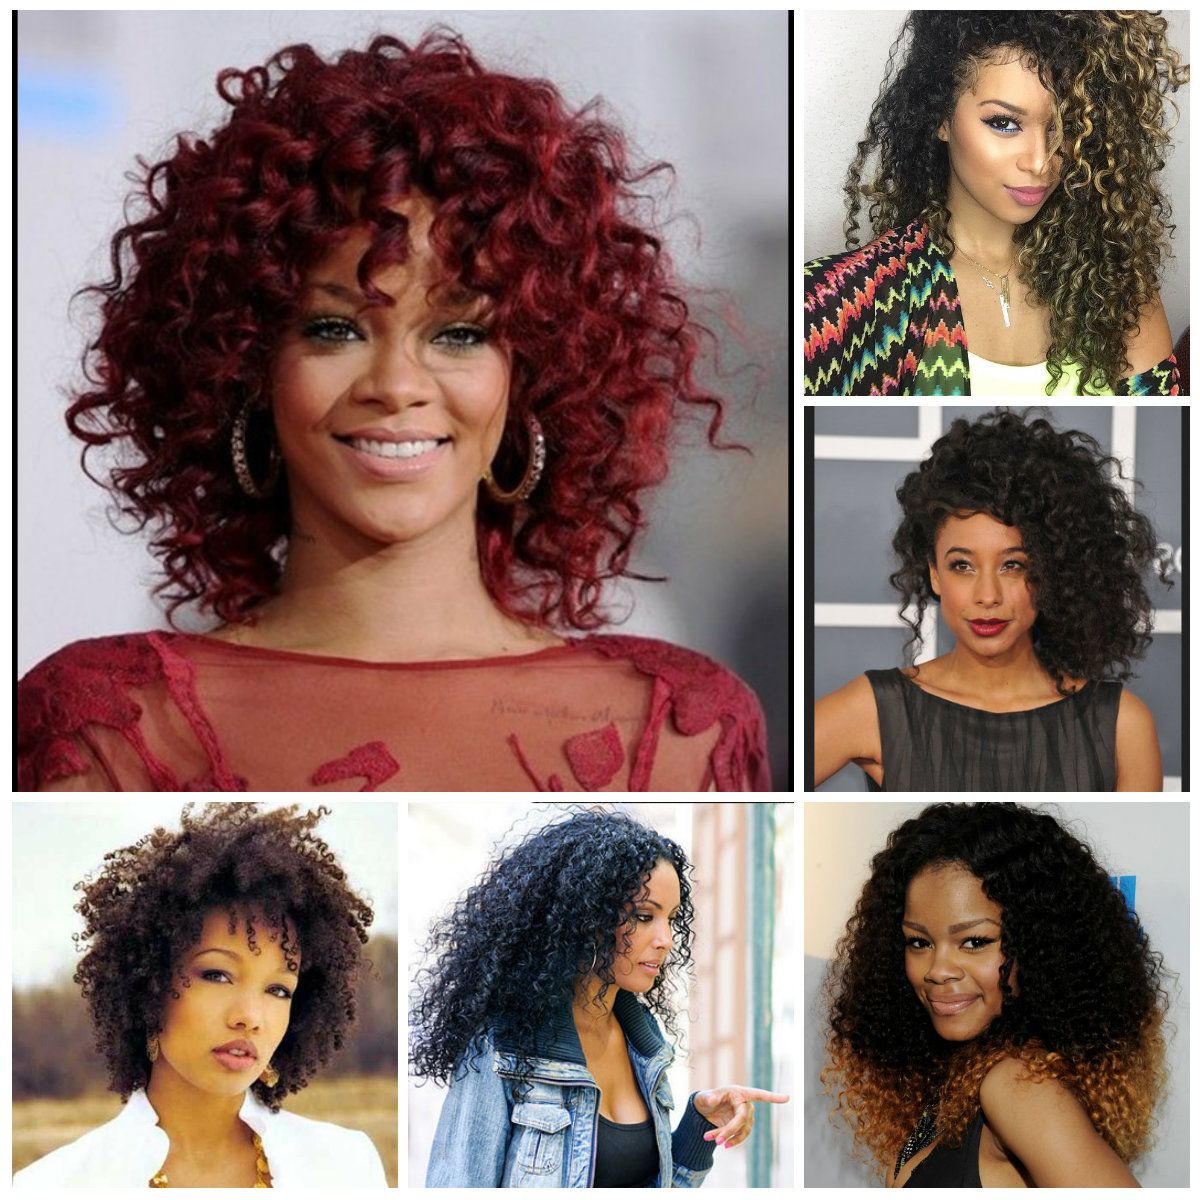 Big Natural Curly Hairstyles For Black Women 2019 | Hairstyles For With Regard To Short Haircuts For Naturally Curly Black Hair (View 19 of 25)